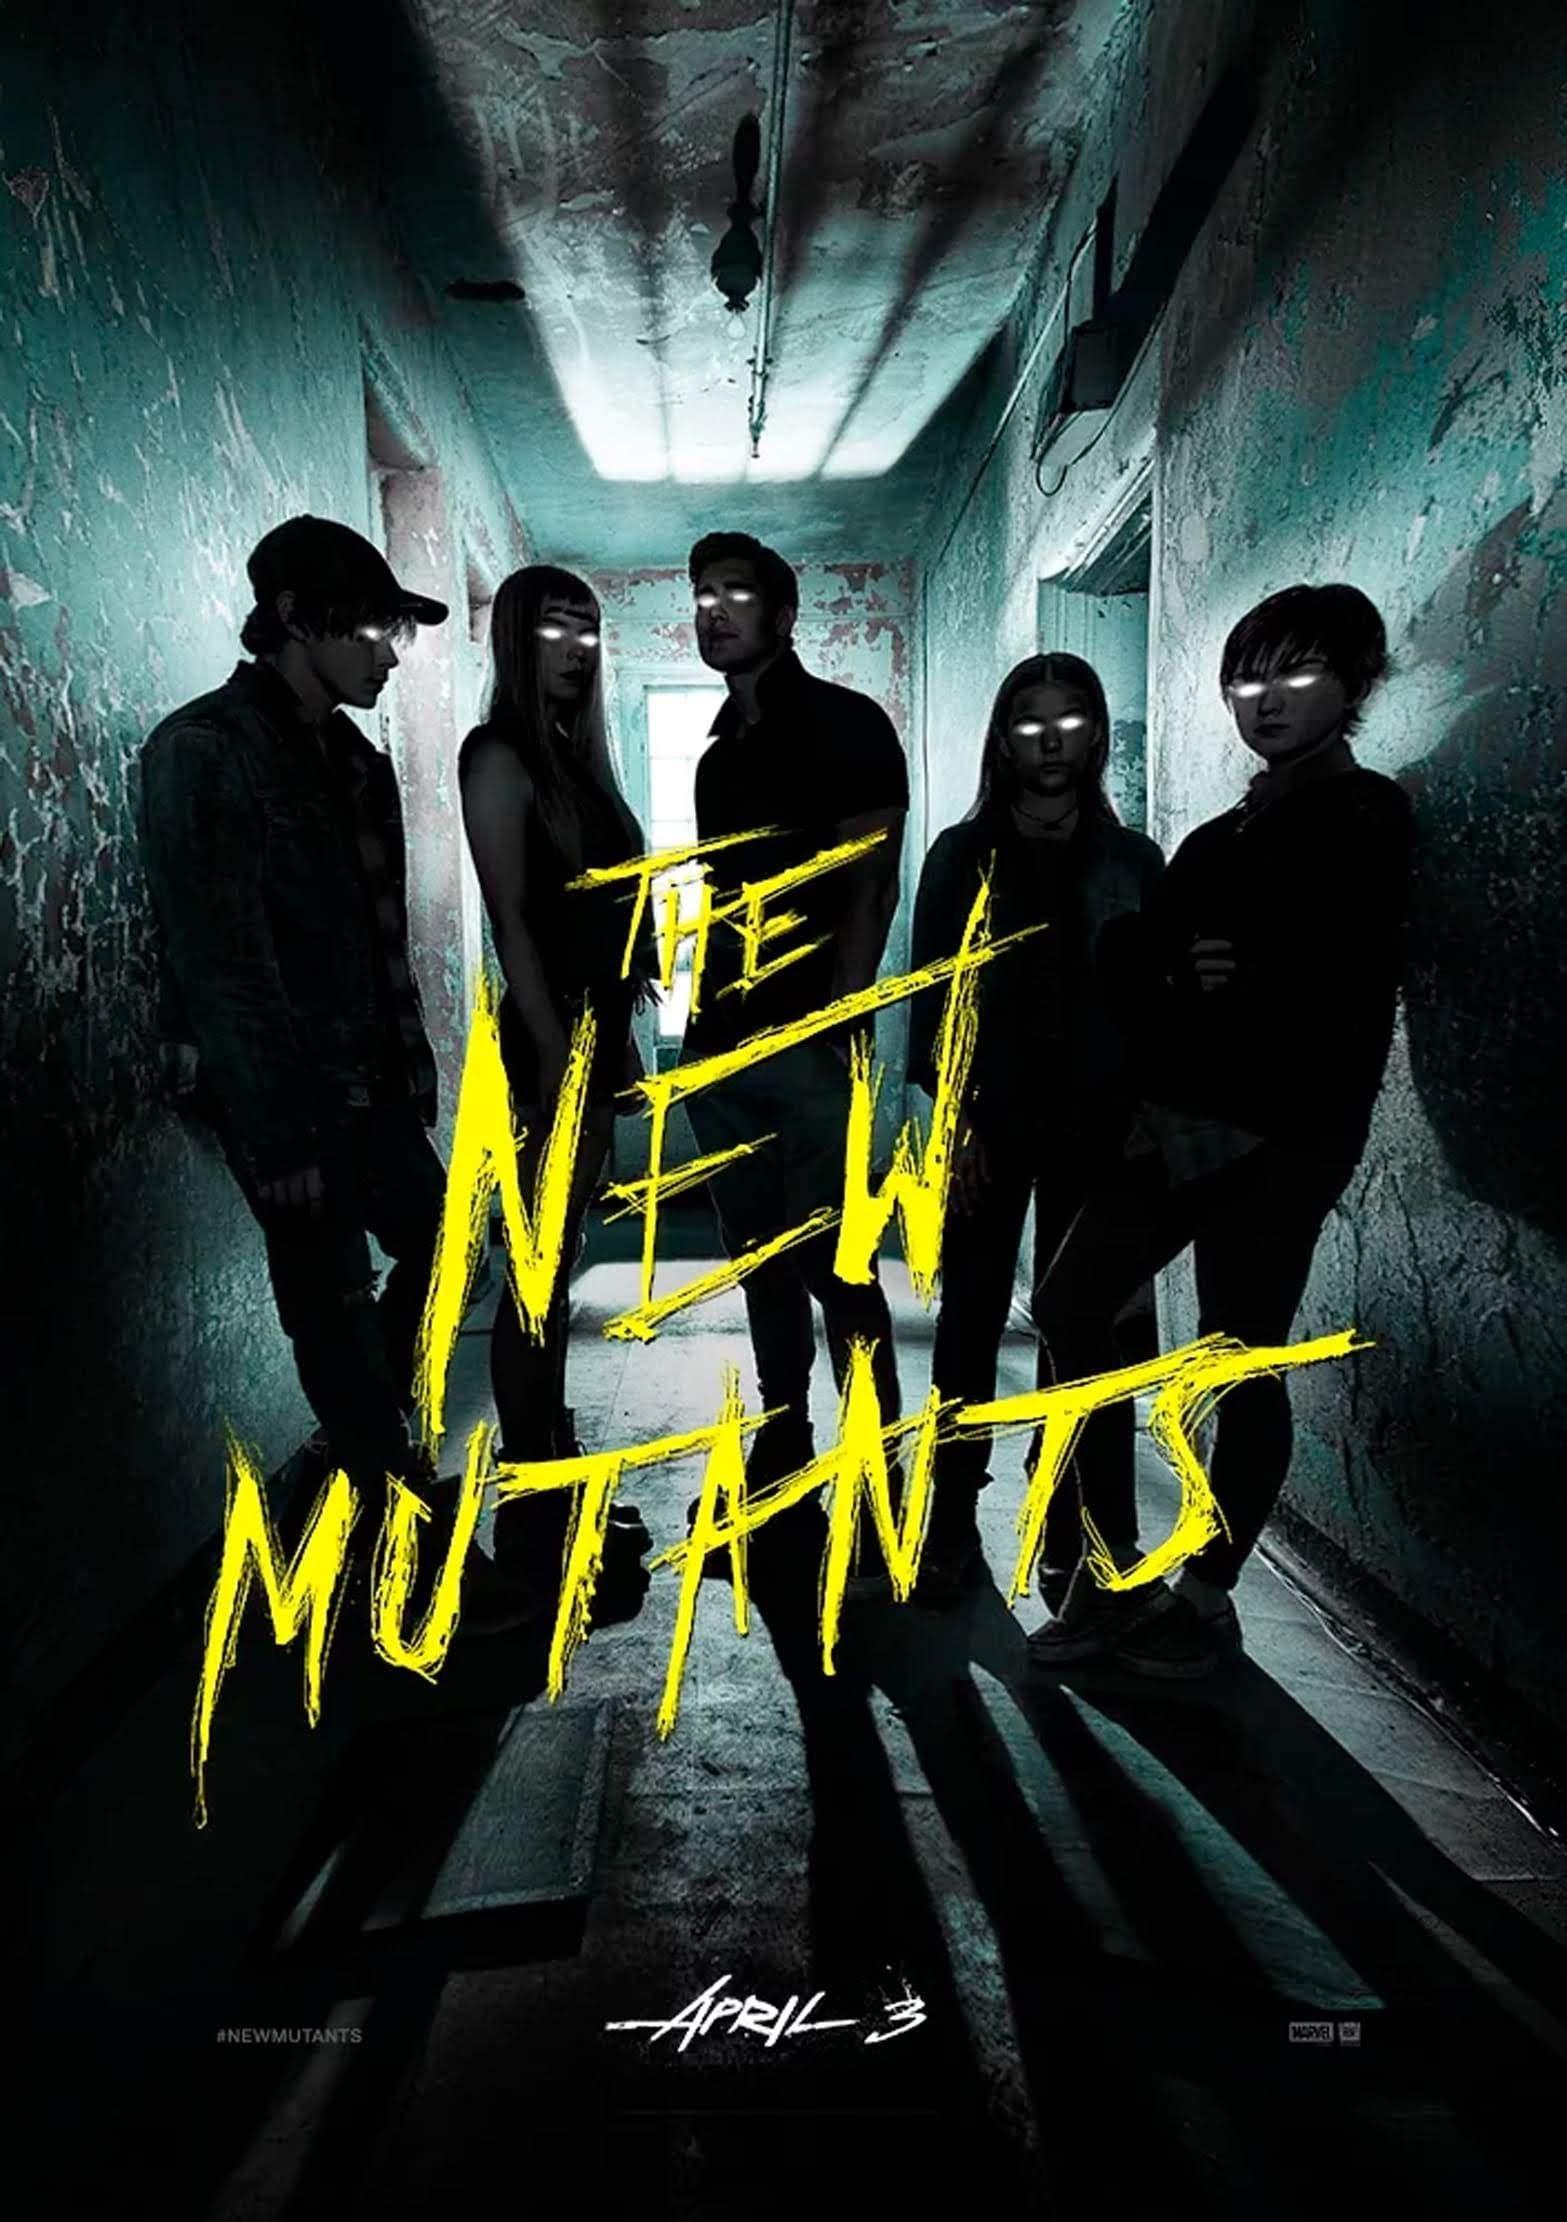 MOVIES: The New Mutants - News Roundup *Updated 19th August 2020*